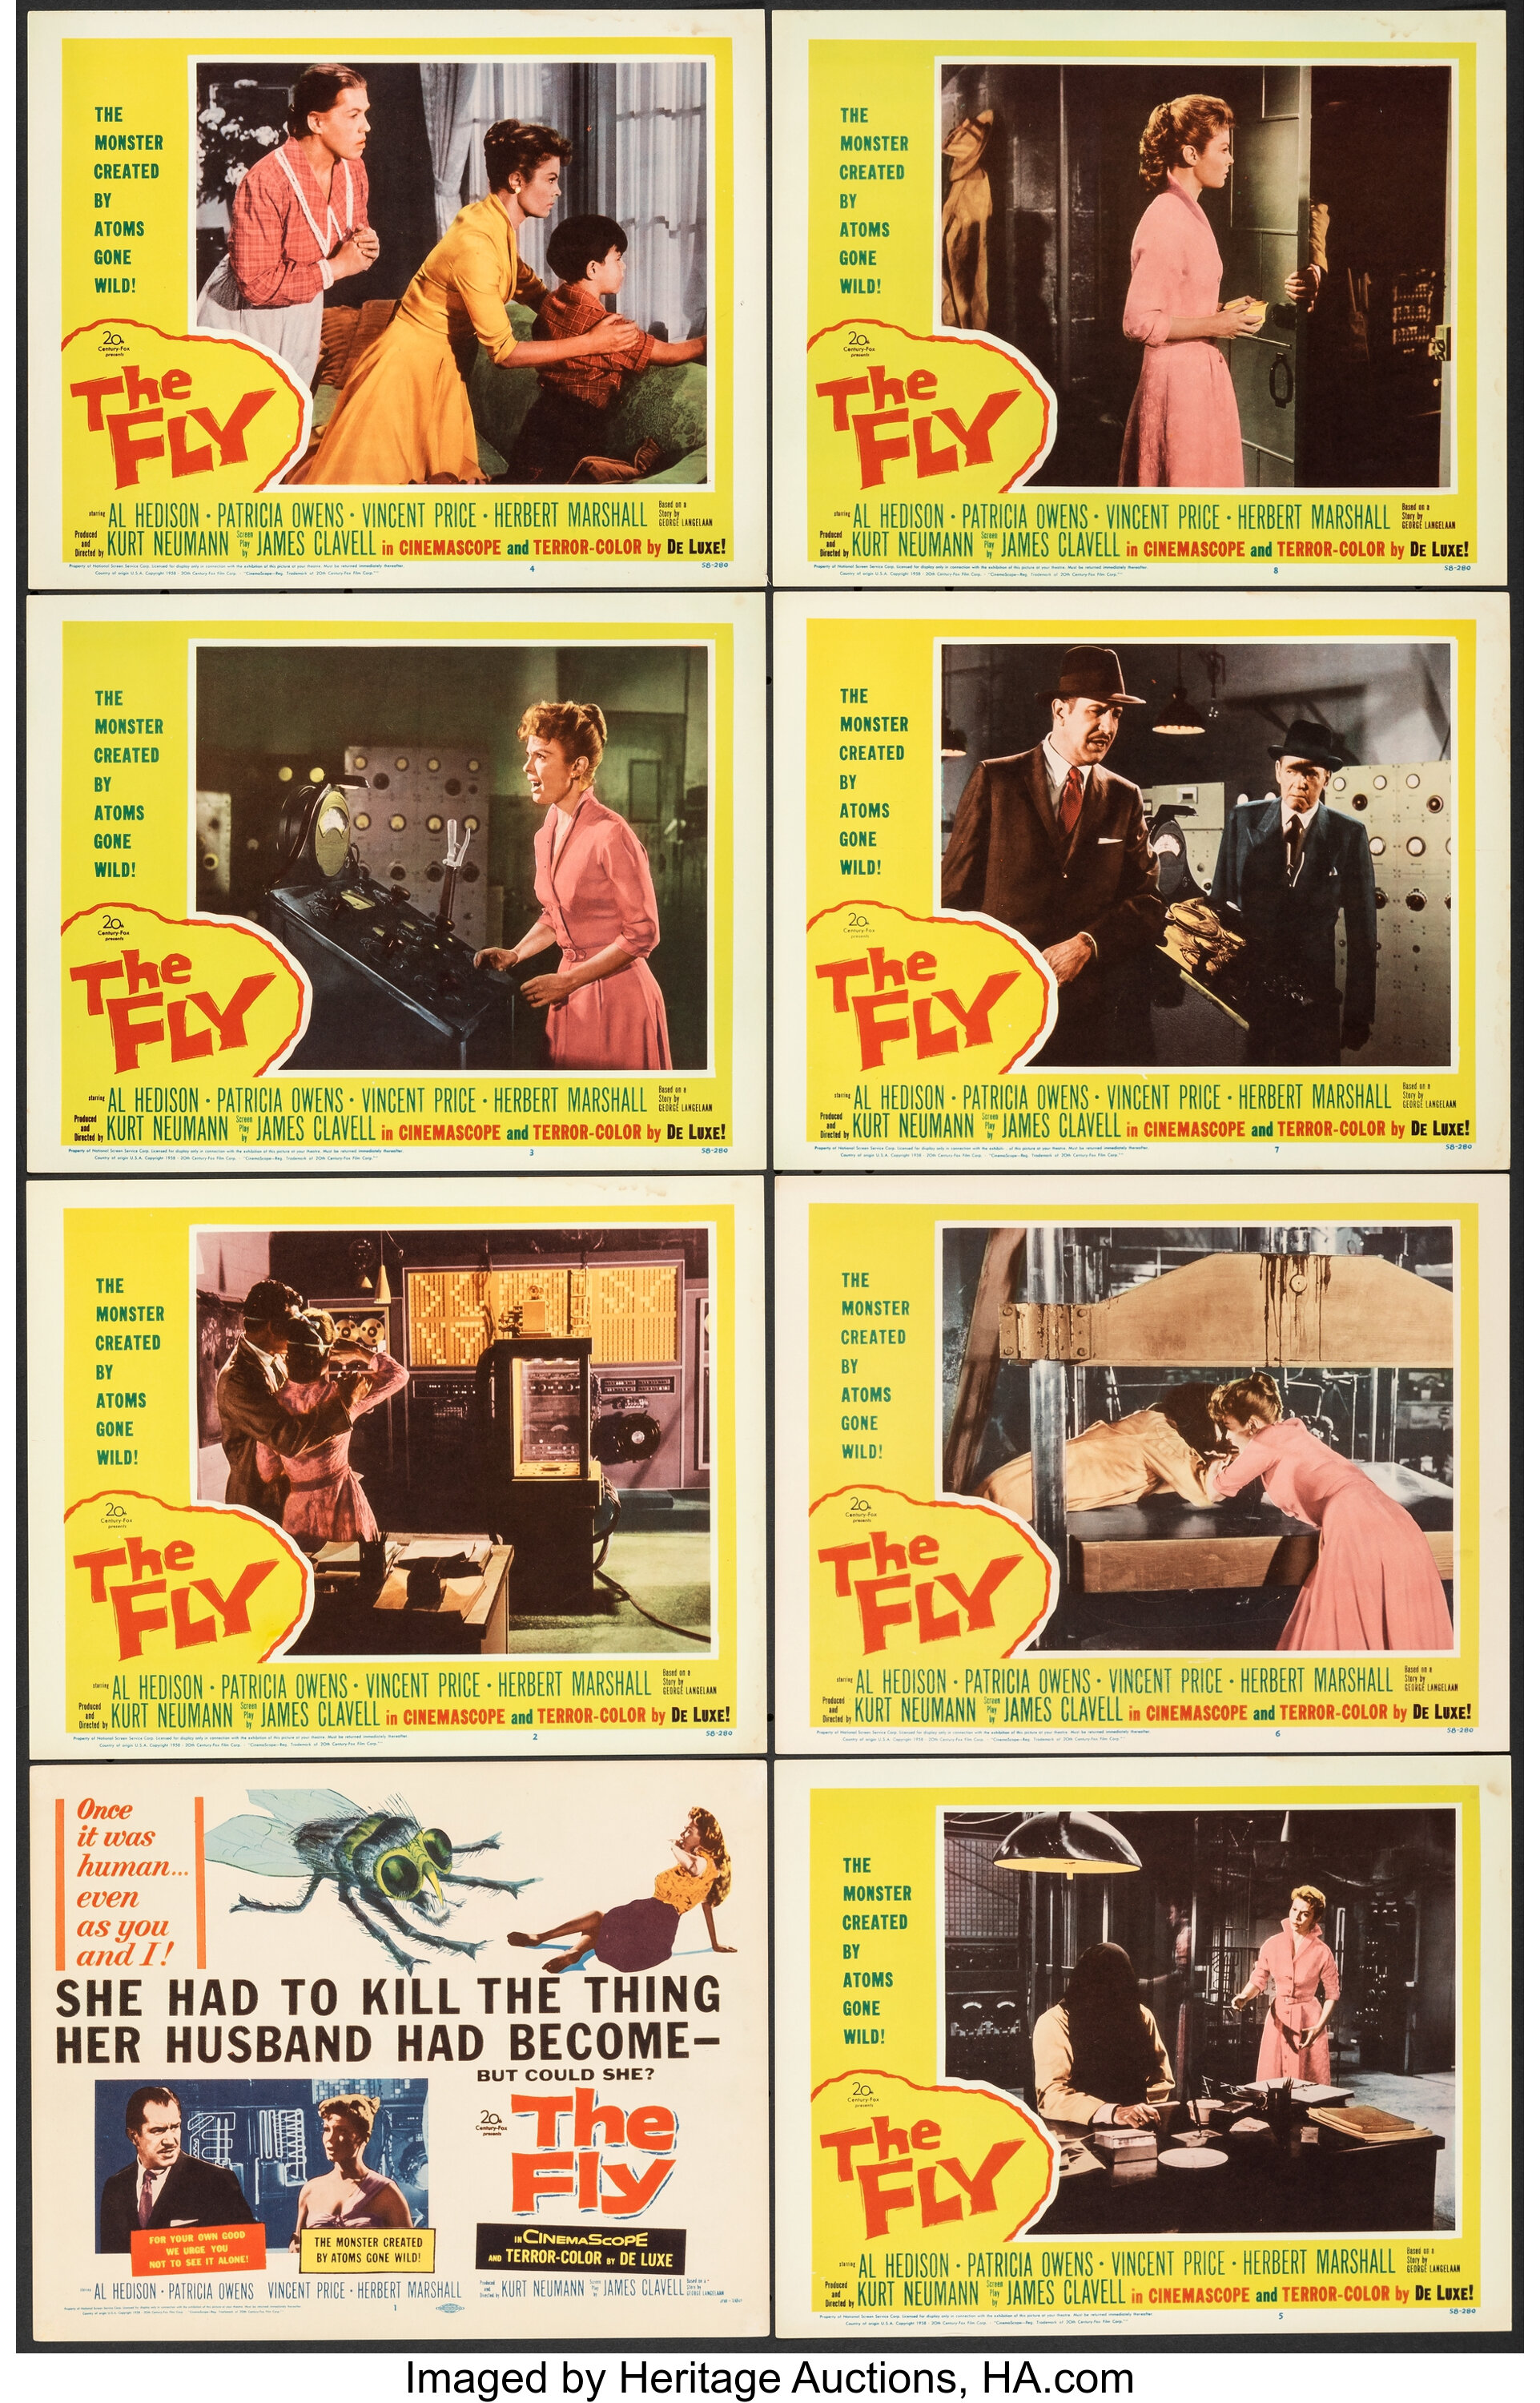 The Fly 20th Century Fox 1958 Very Fine Lobby Card Set Of 8 Lot 53095 Heritage Auctions